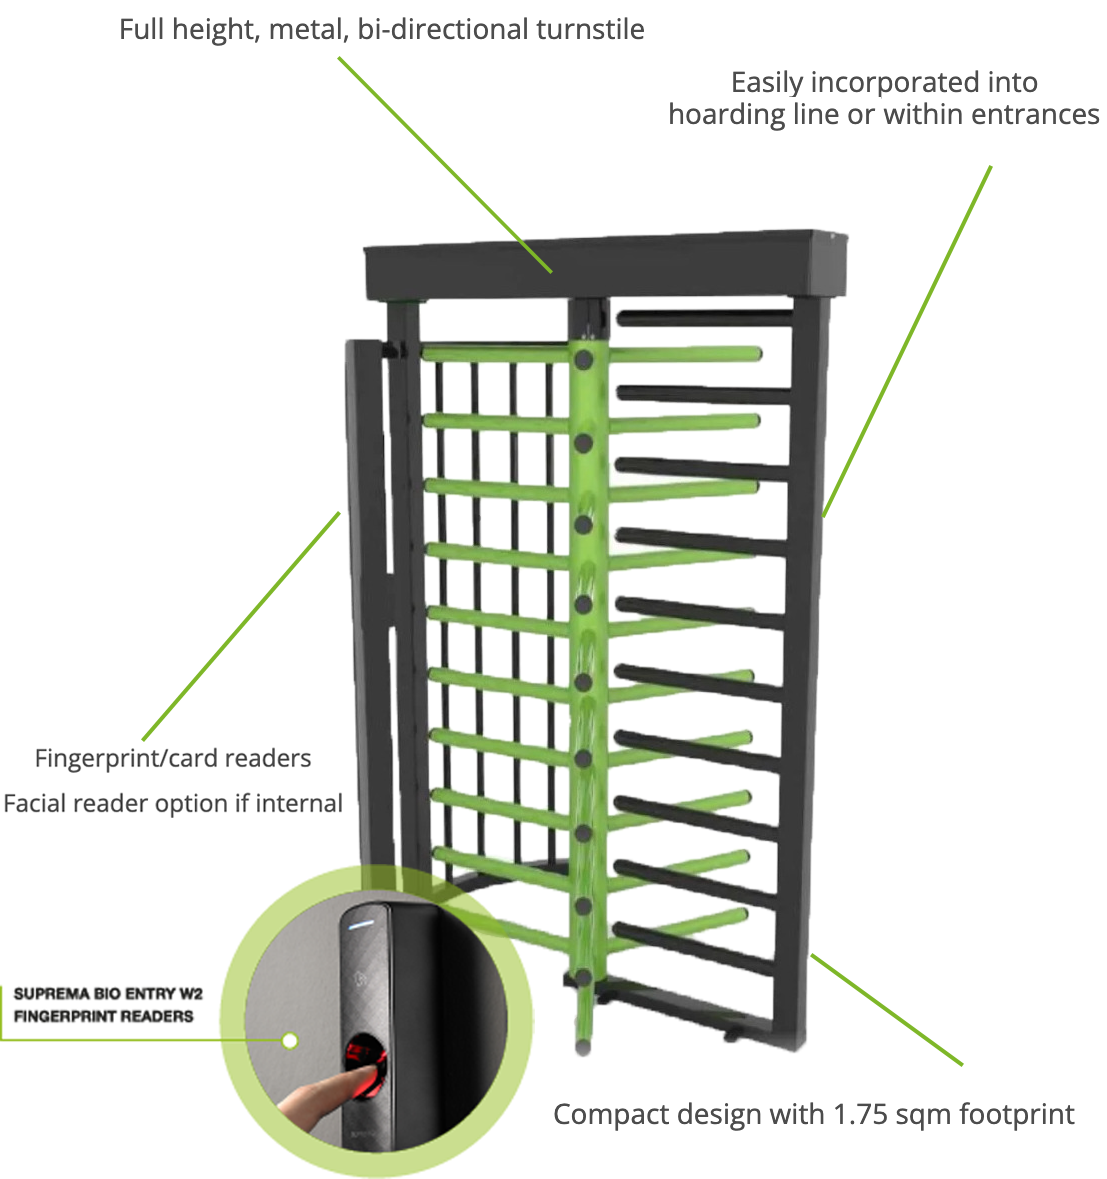 black and green inline biometric turnstile for construction site access.